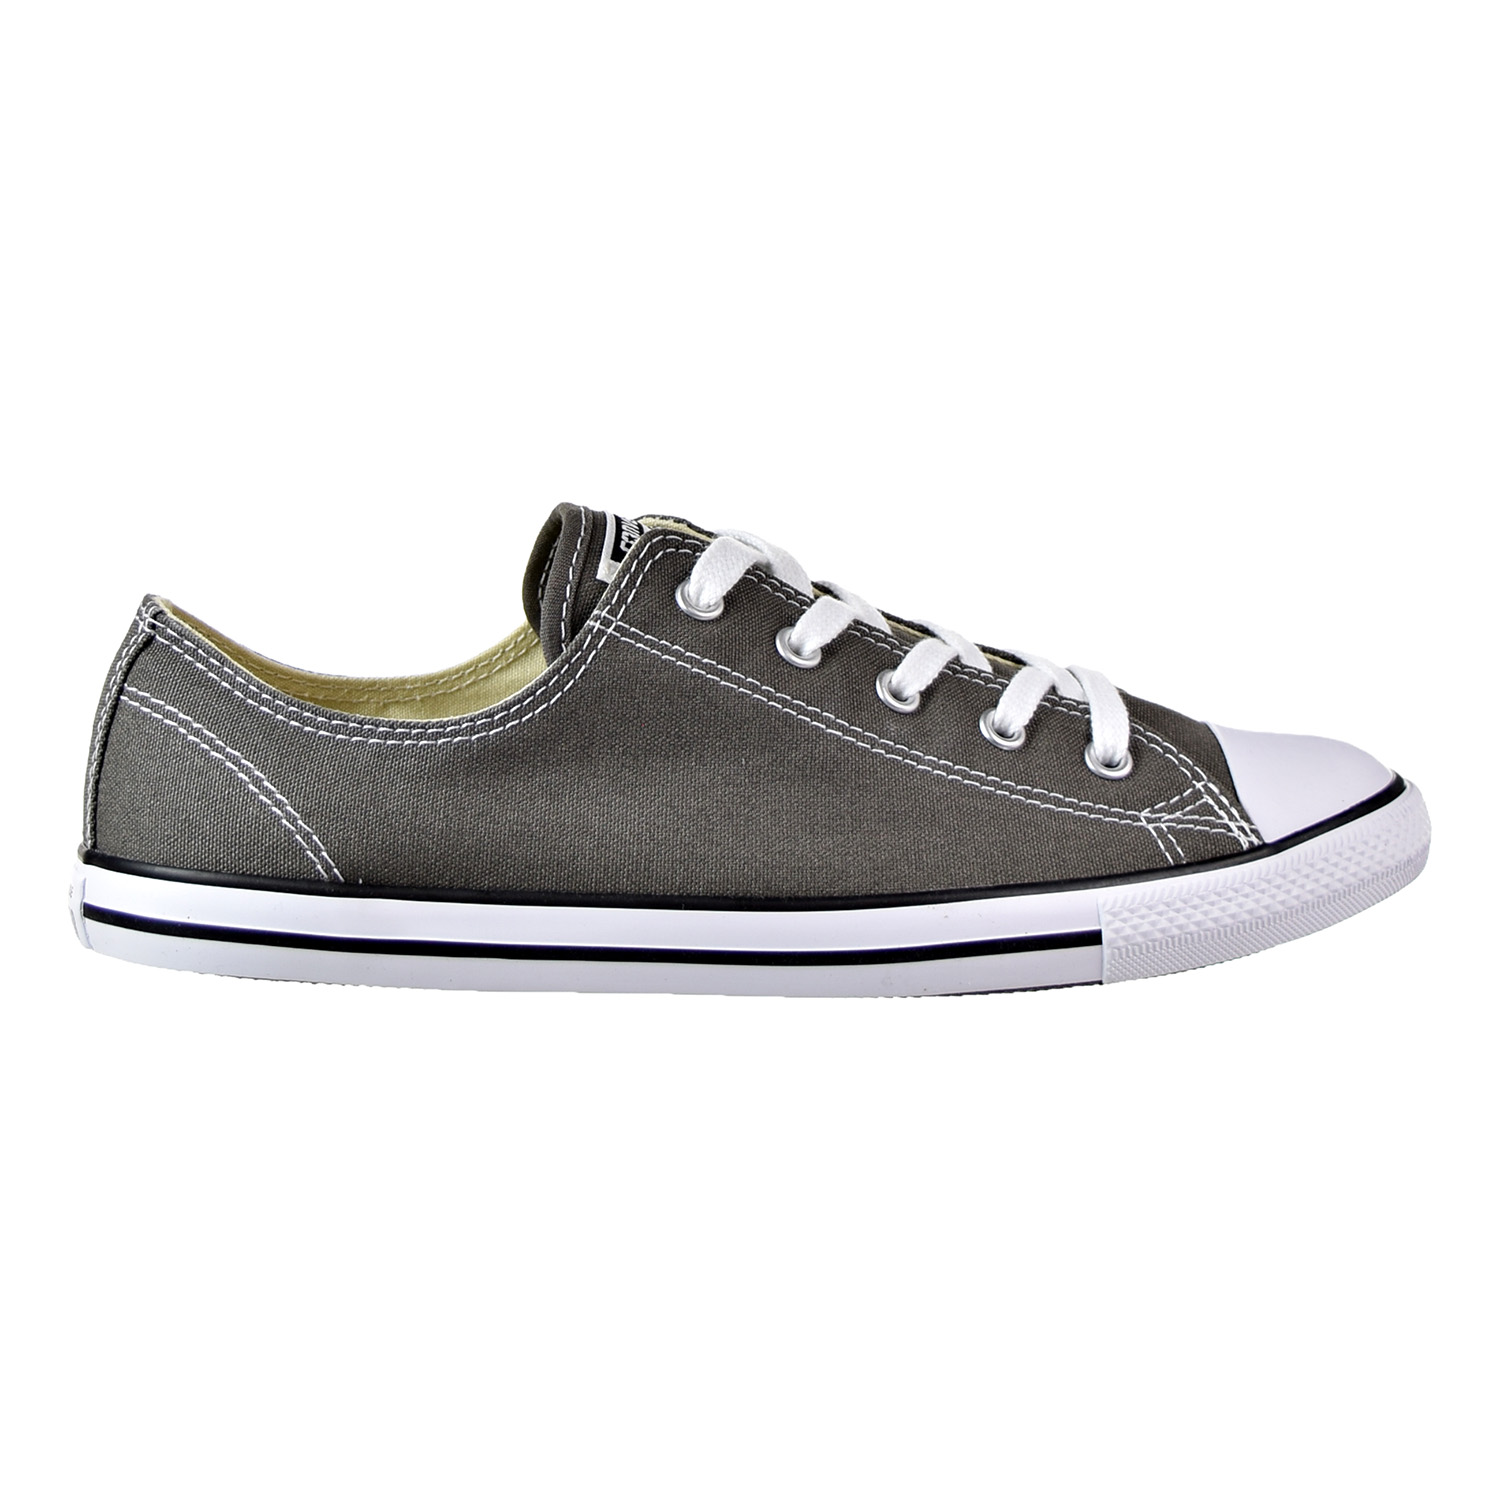 culture visual blade Converse Chuck Taylor All Star Dainty Ox Women's Shoes Charcoal 532353f (5  B(M) US)